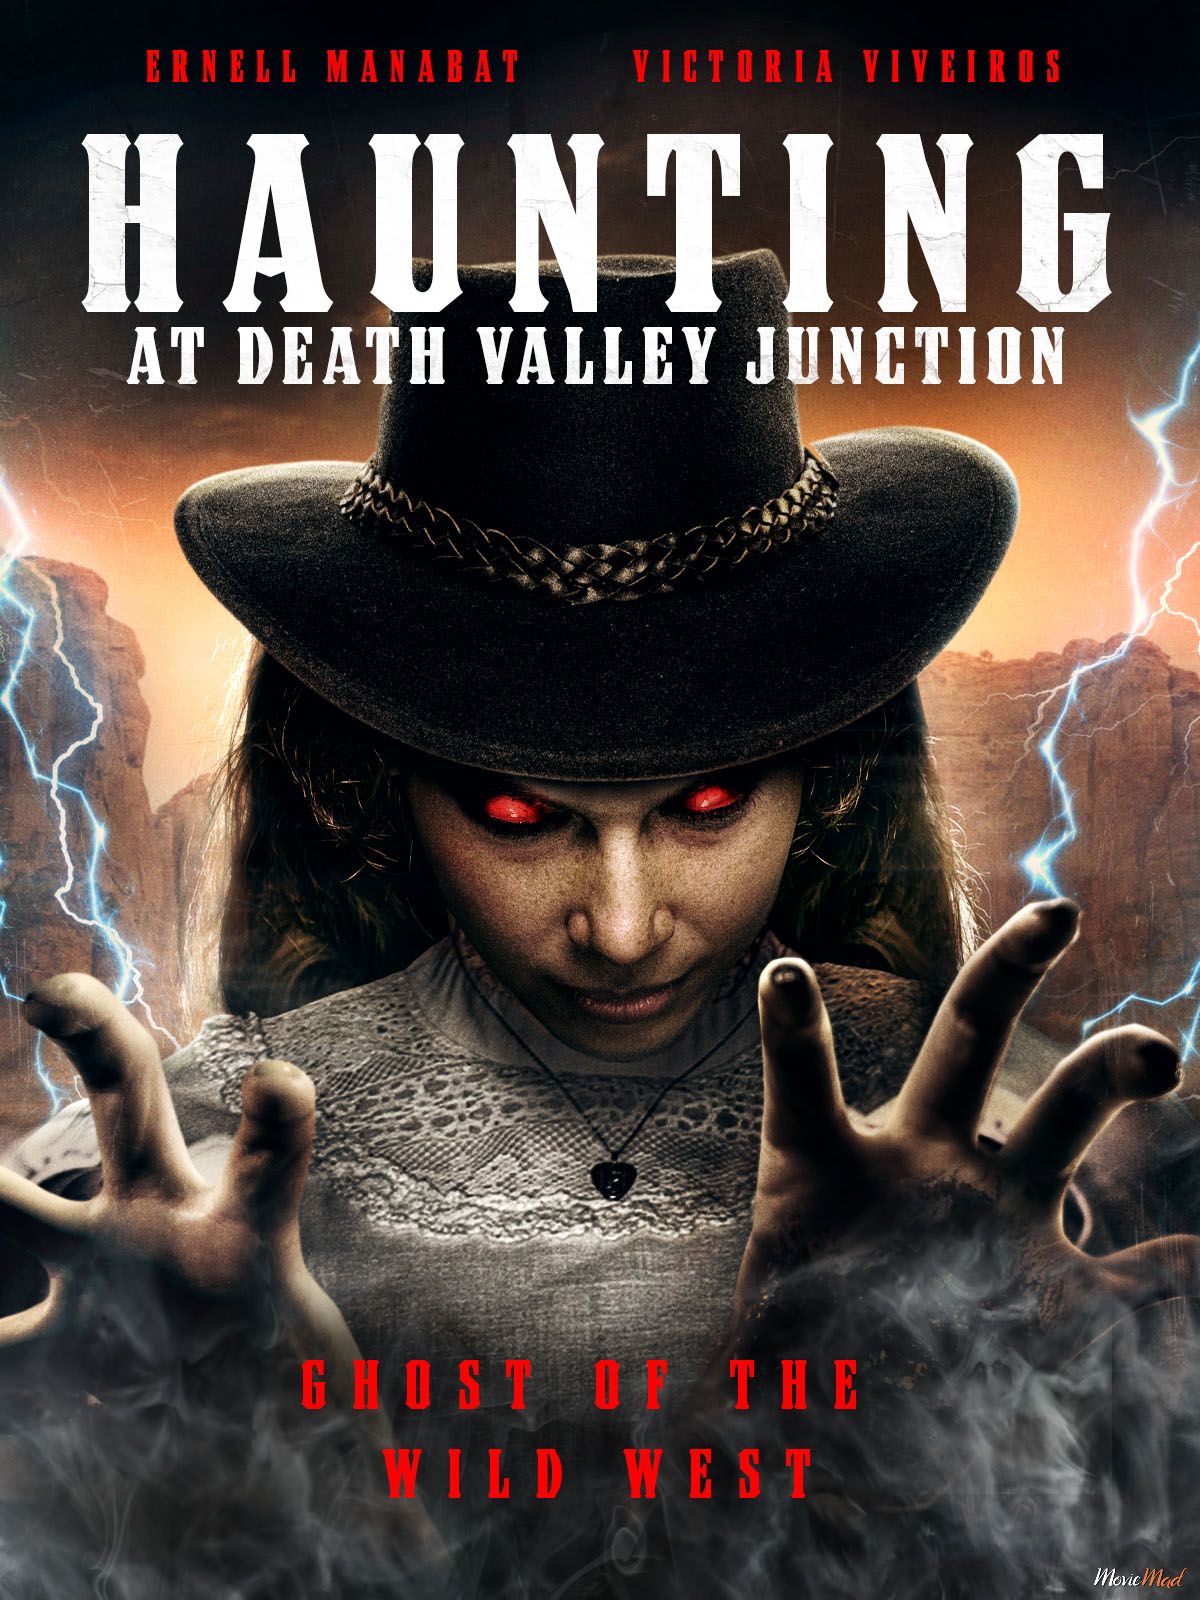 The Haunting at Death Valley Junction 2020 English HDRip Full Movie 720p 480p